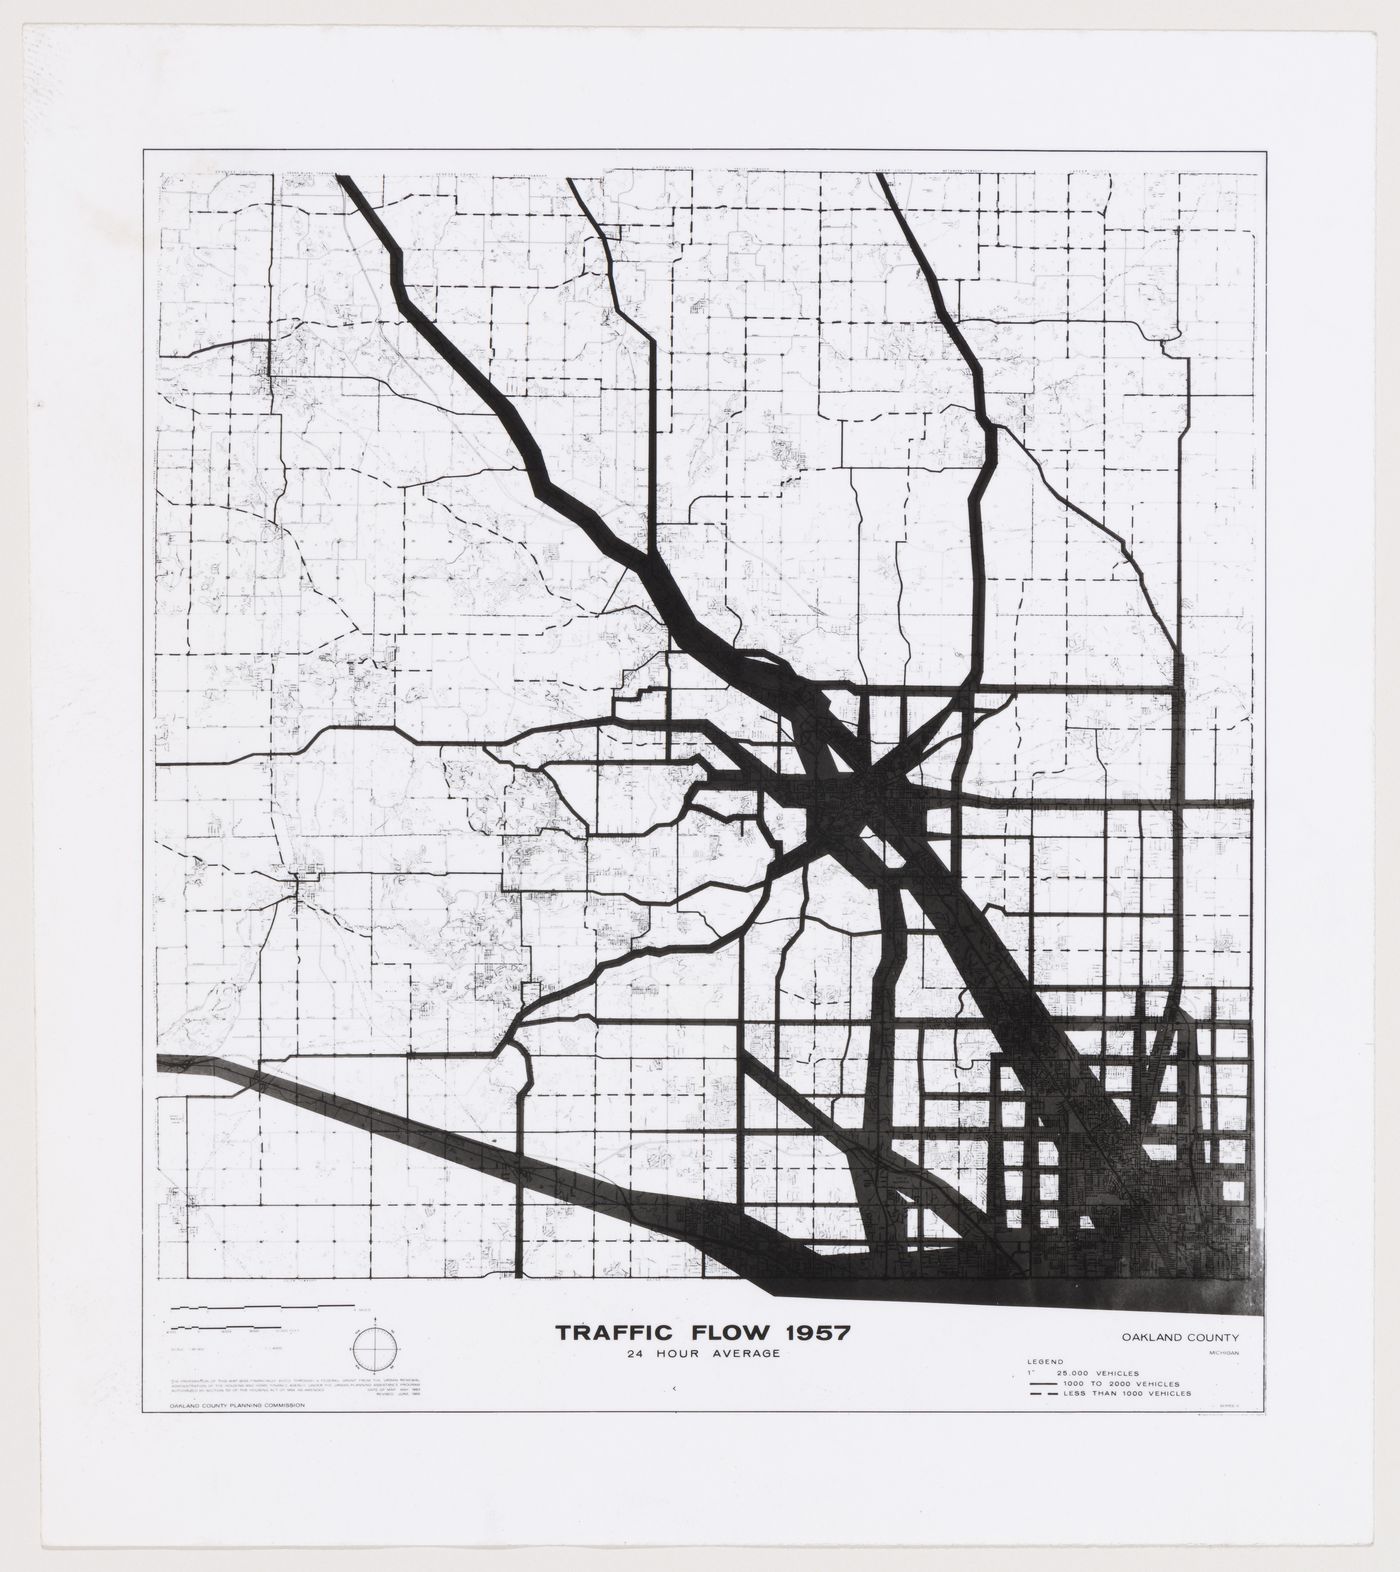 Photograph of a map showing traffic flow in 1957 for Oakland County, Michigan--from the project file "Detroit Think Grid"